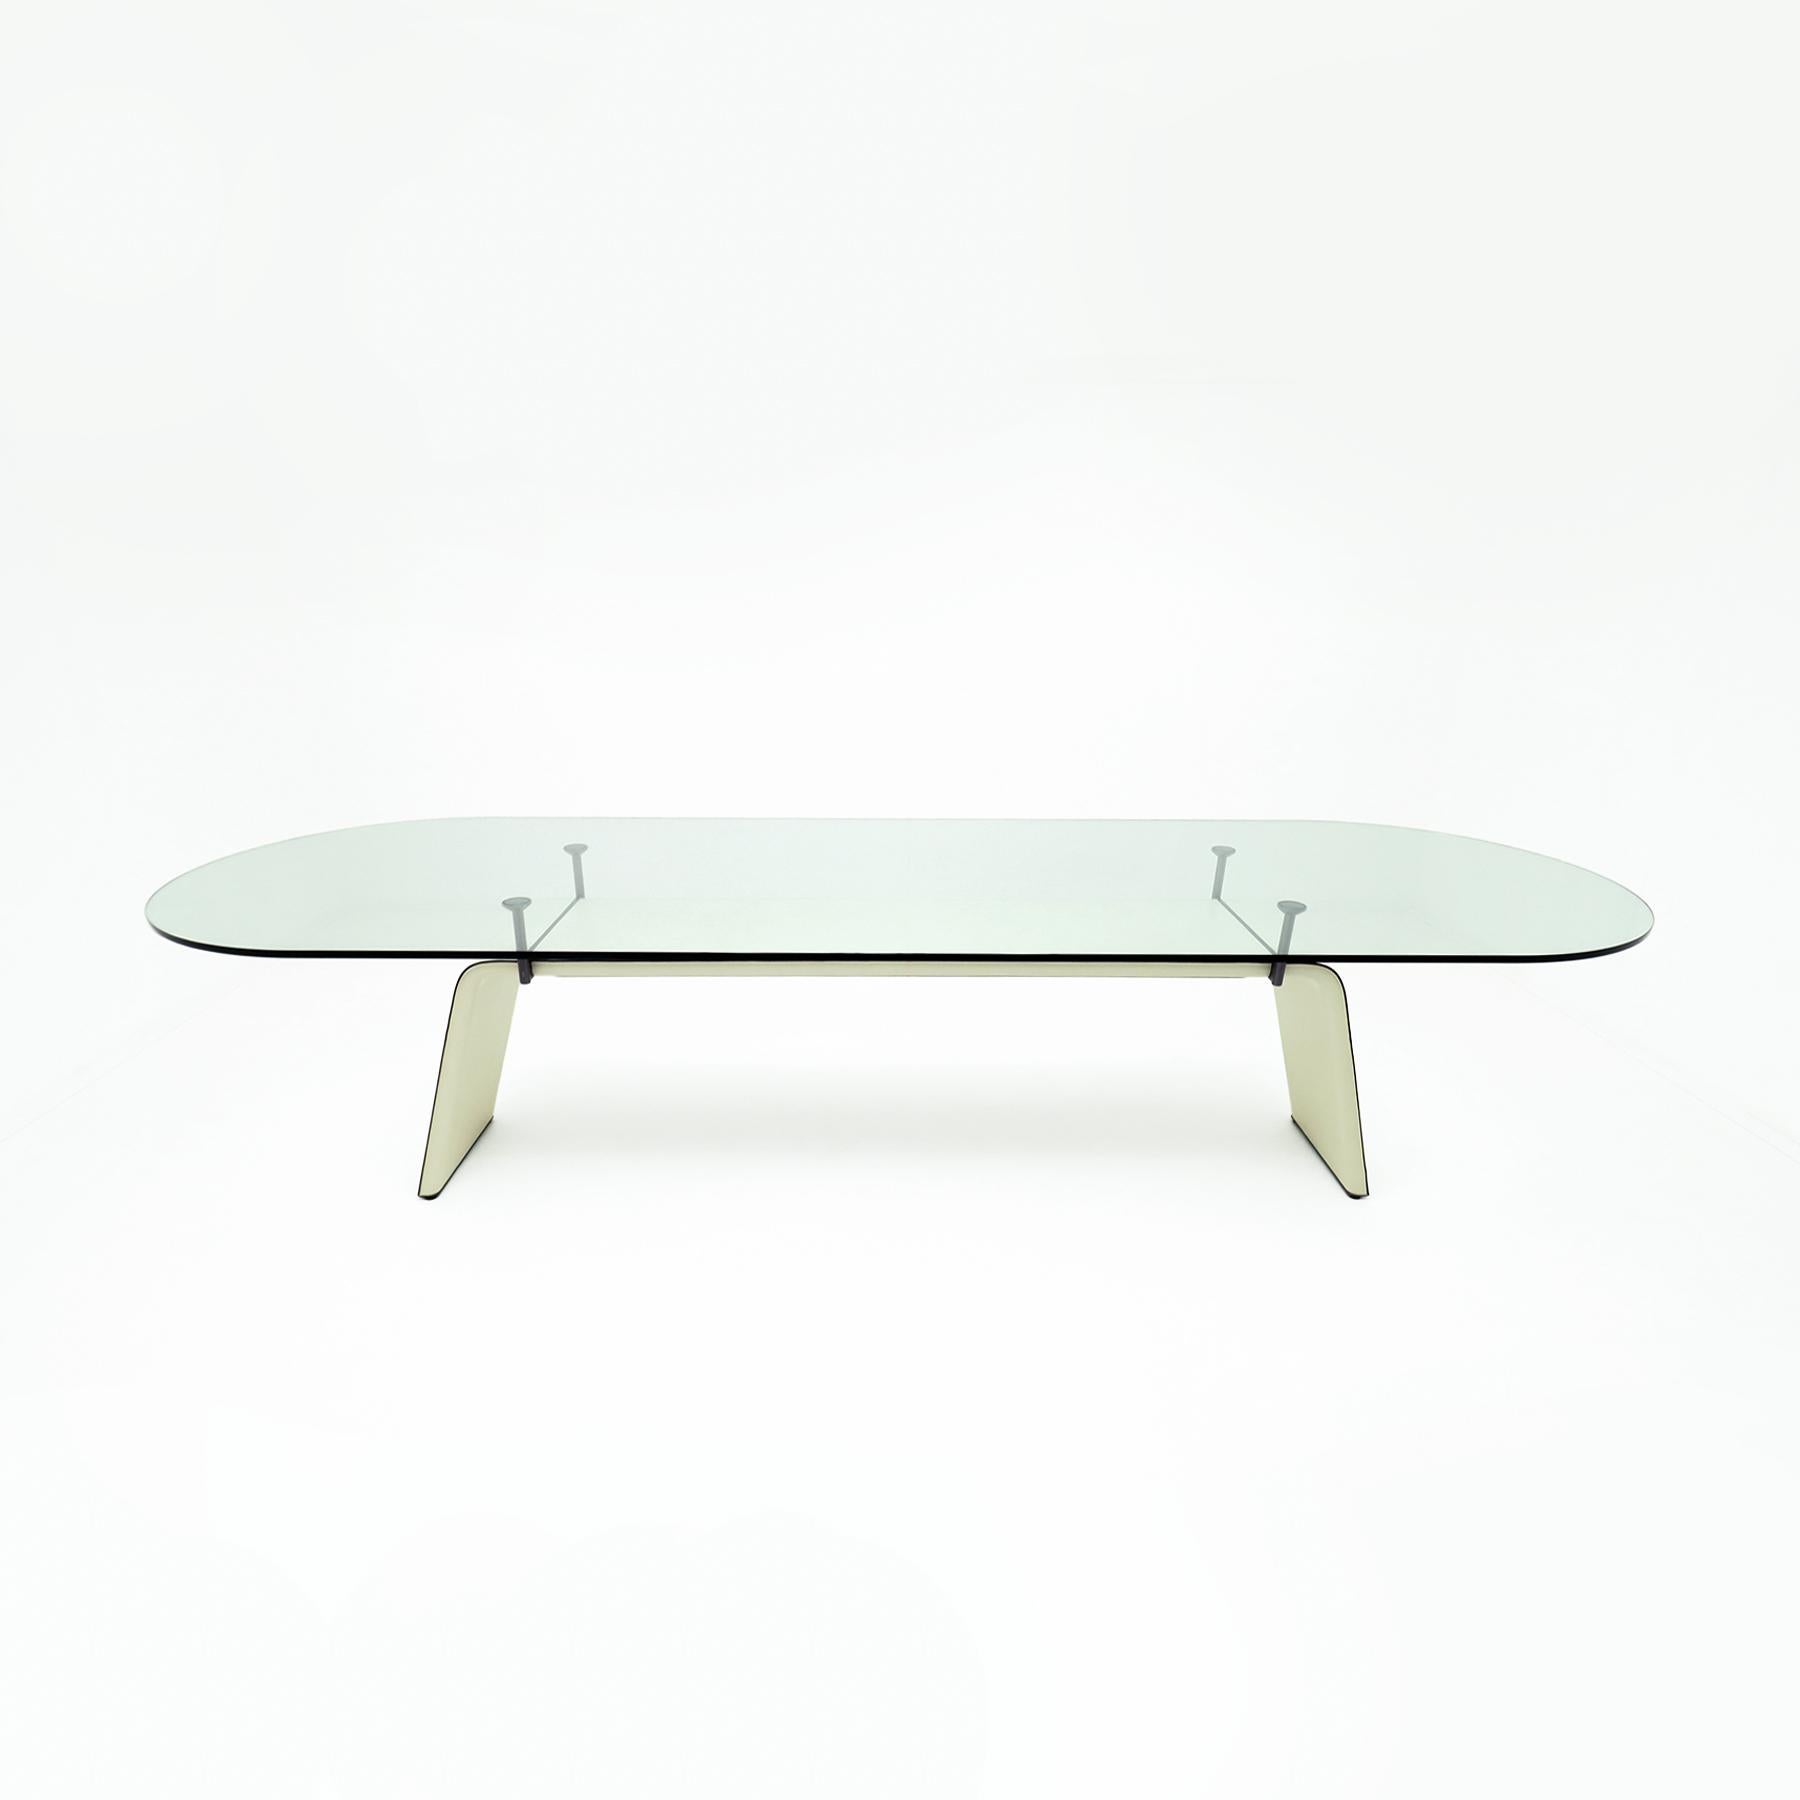 Italian 12 seat Vintage Matteo Grassi leather and glass oval racetrack dining table For Sale